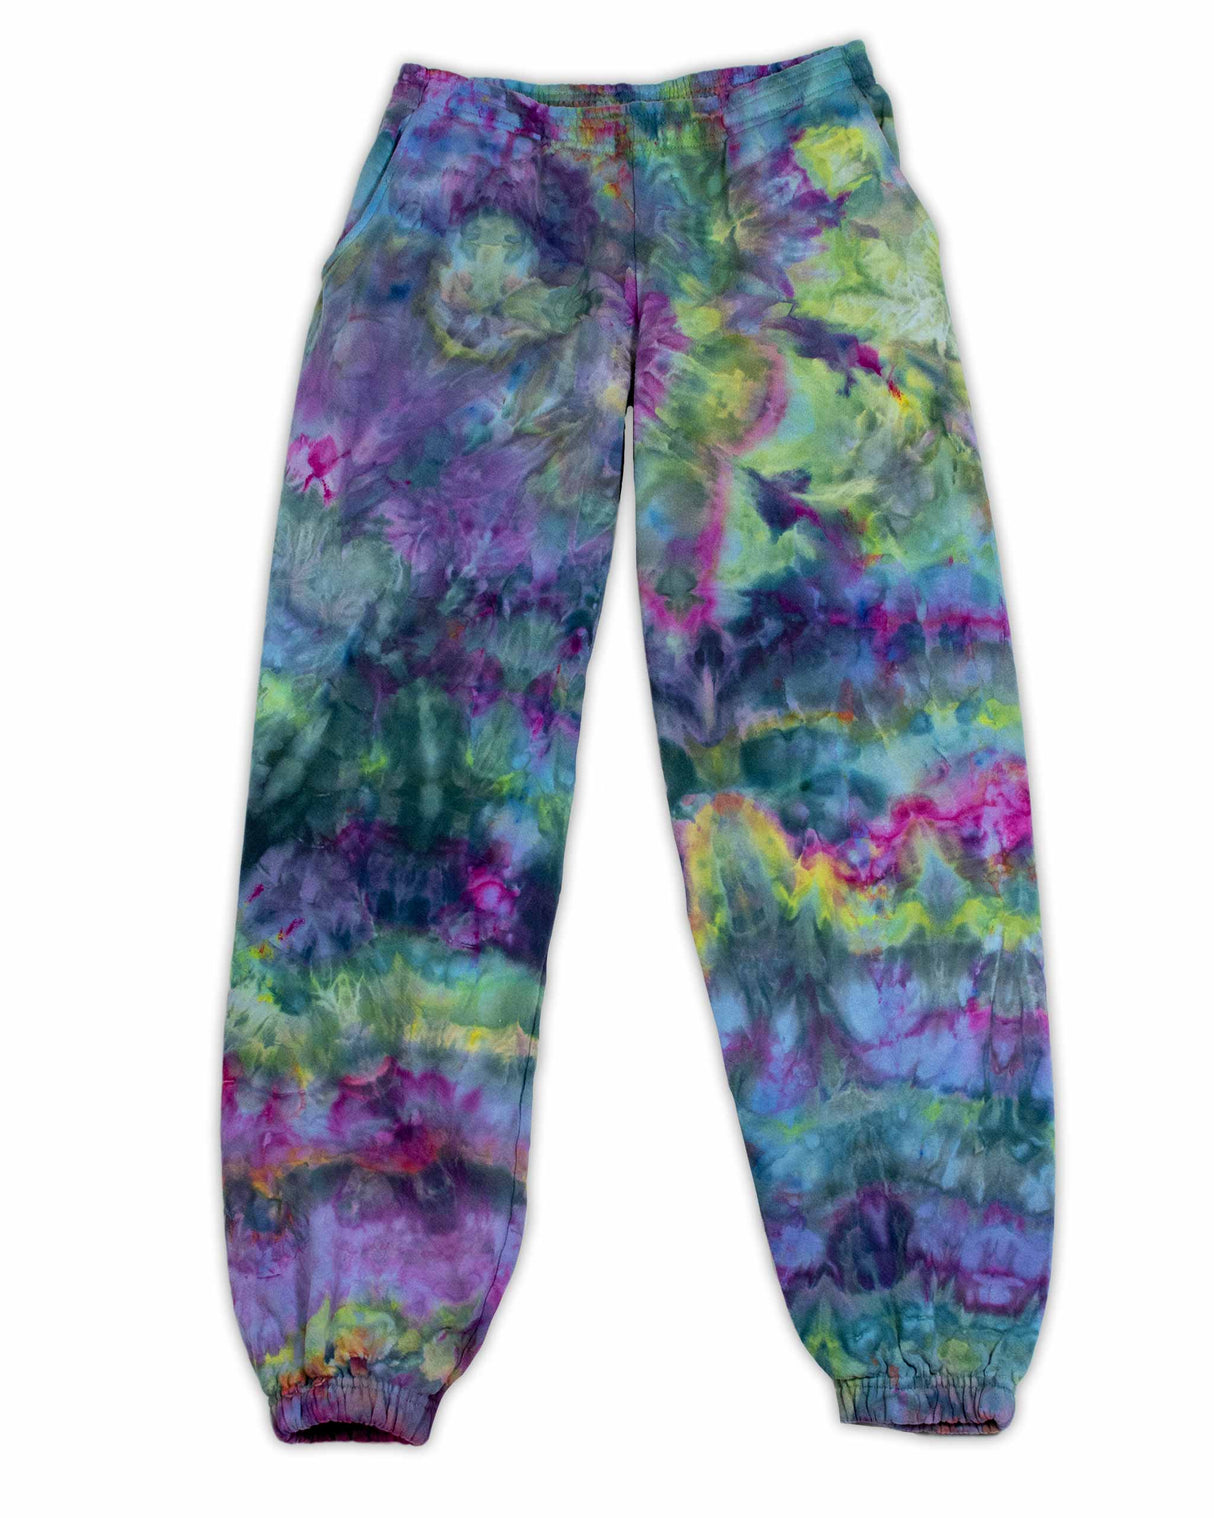 These sweatpants are adorned with a vibrant ice-dyed design, incorporating a spectrum of amethyst, jade, and magenta hues for a bold statement.